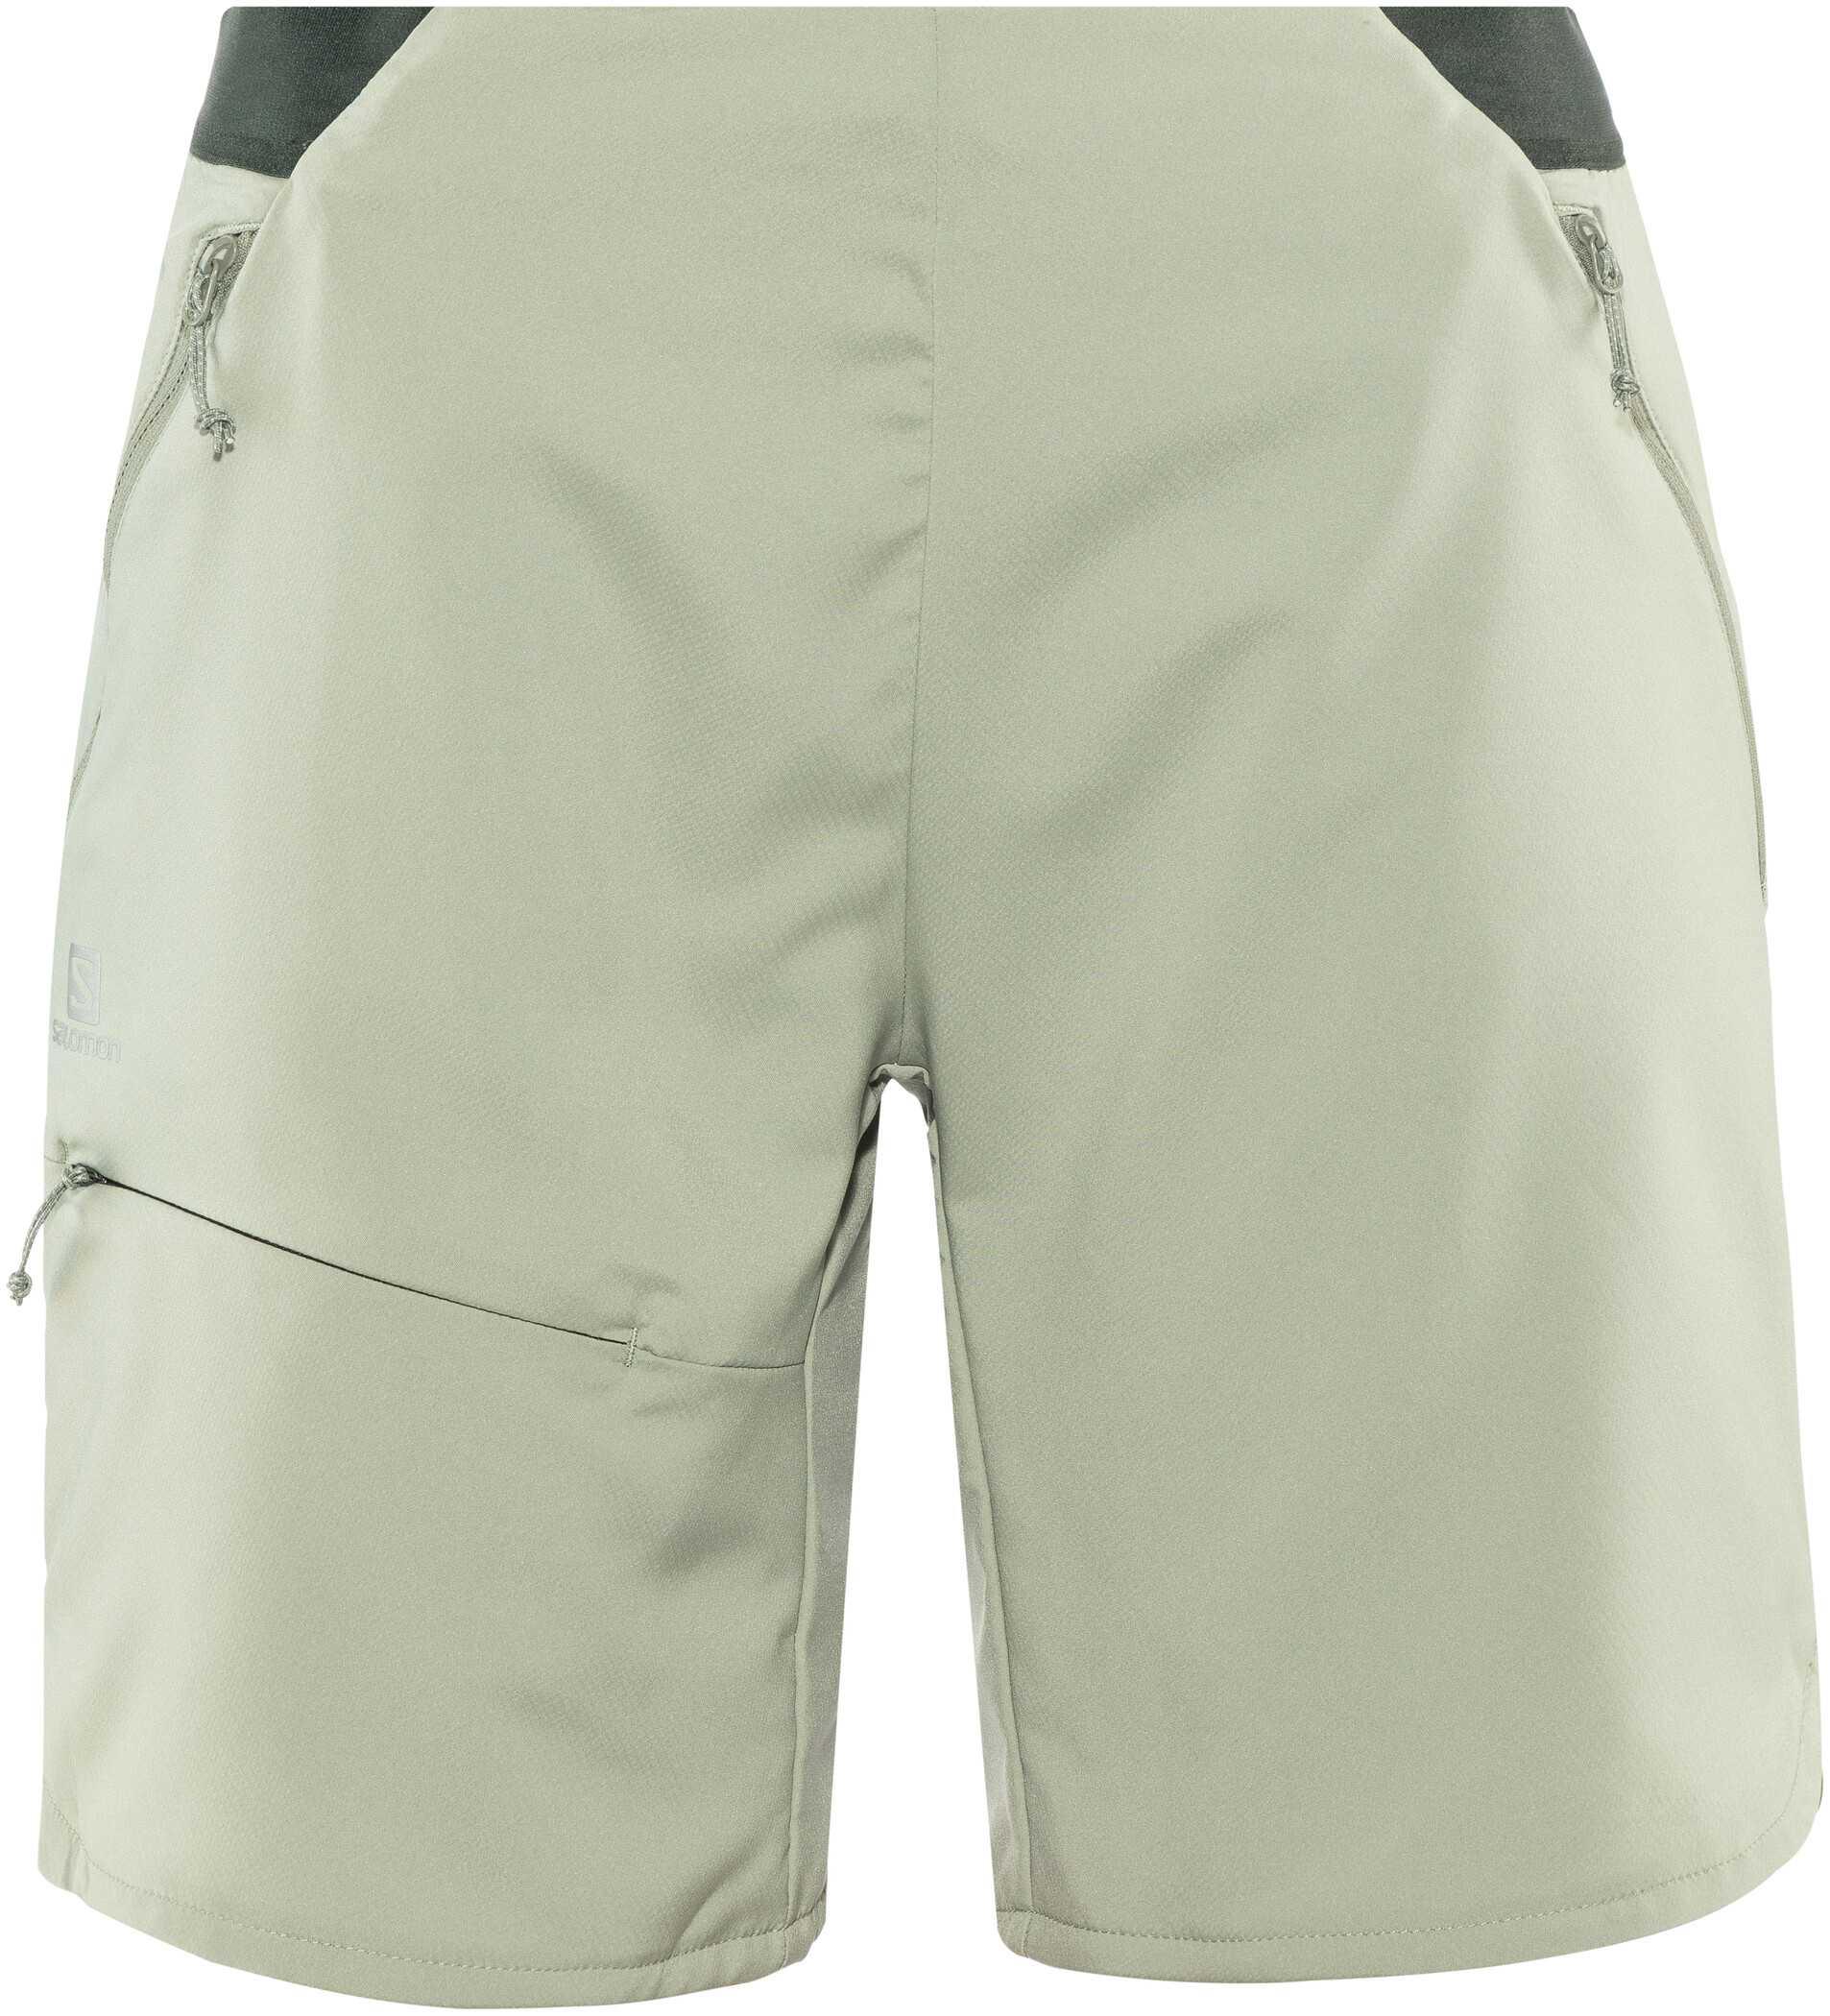 march clue Logically Salomon Outspeed Shorts Women | Addnature.co.uk